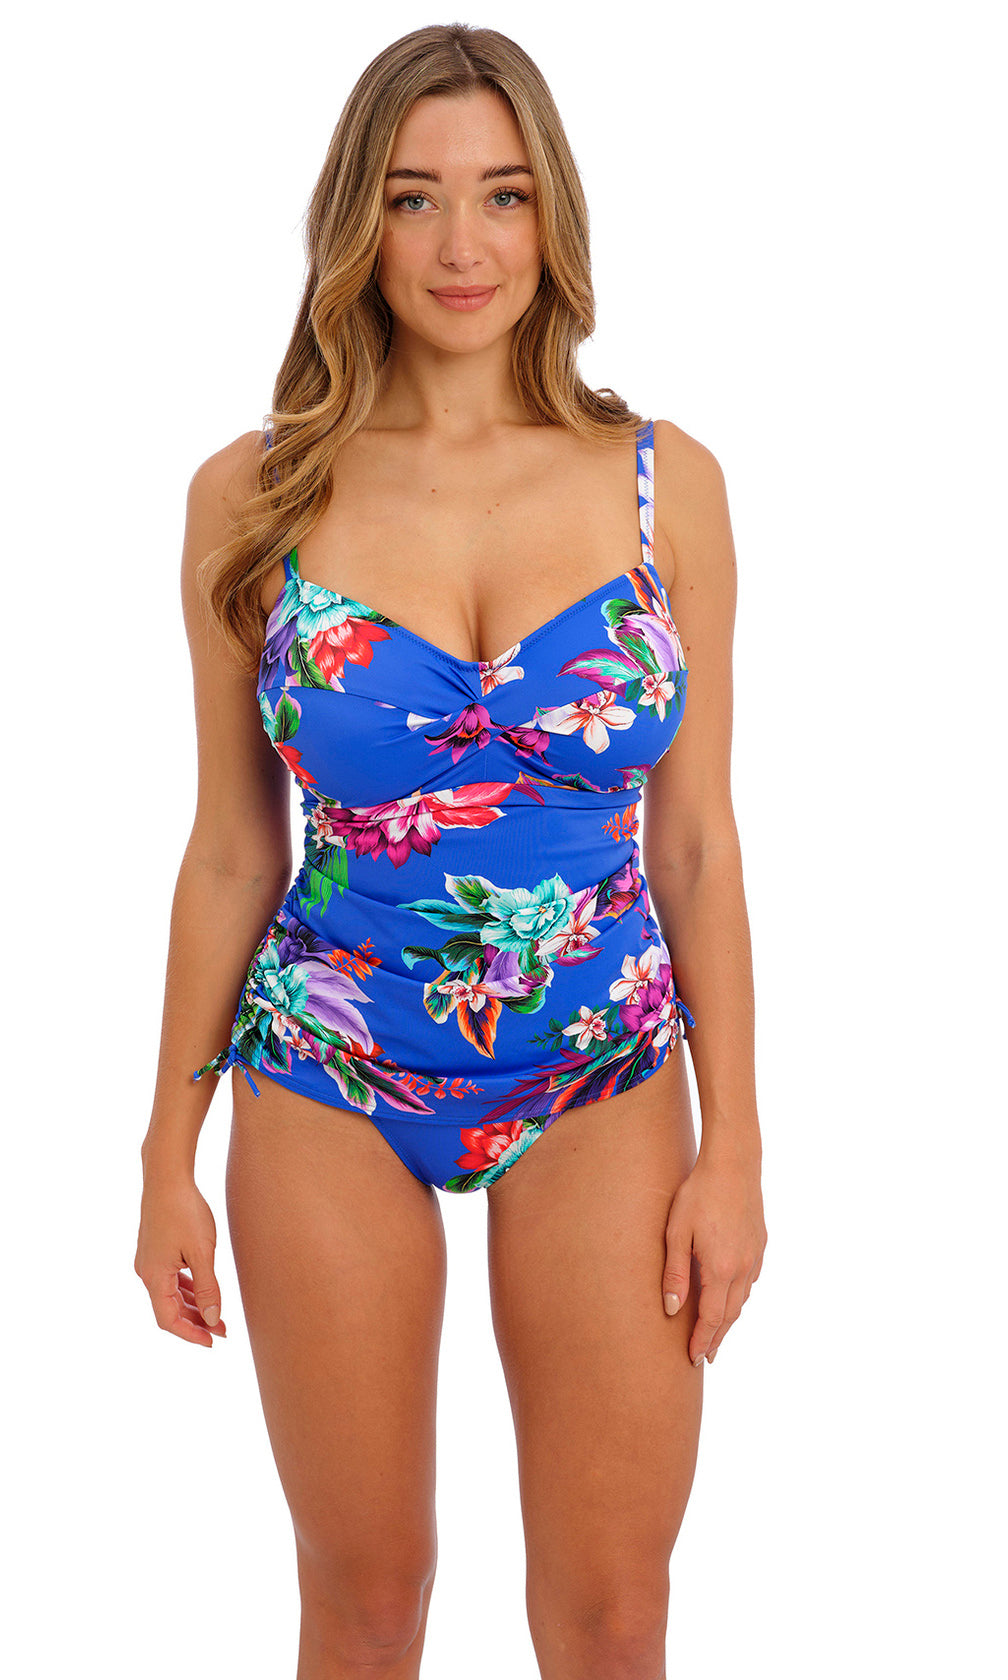 Halkidiki Ultramarine UW Twist Front Tankini, Special Order D Cup to H Cup